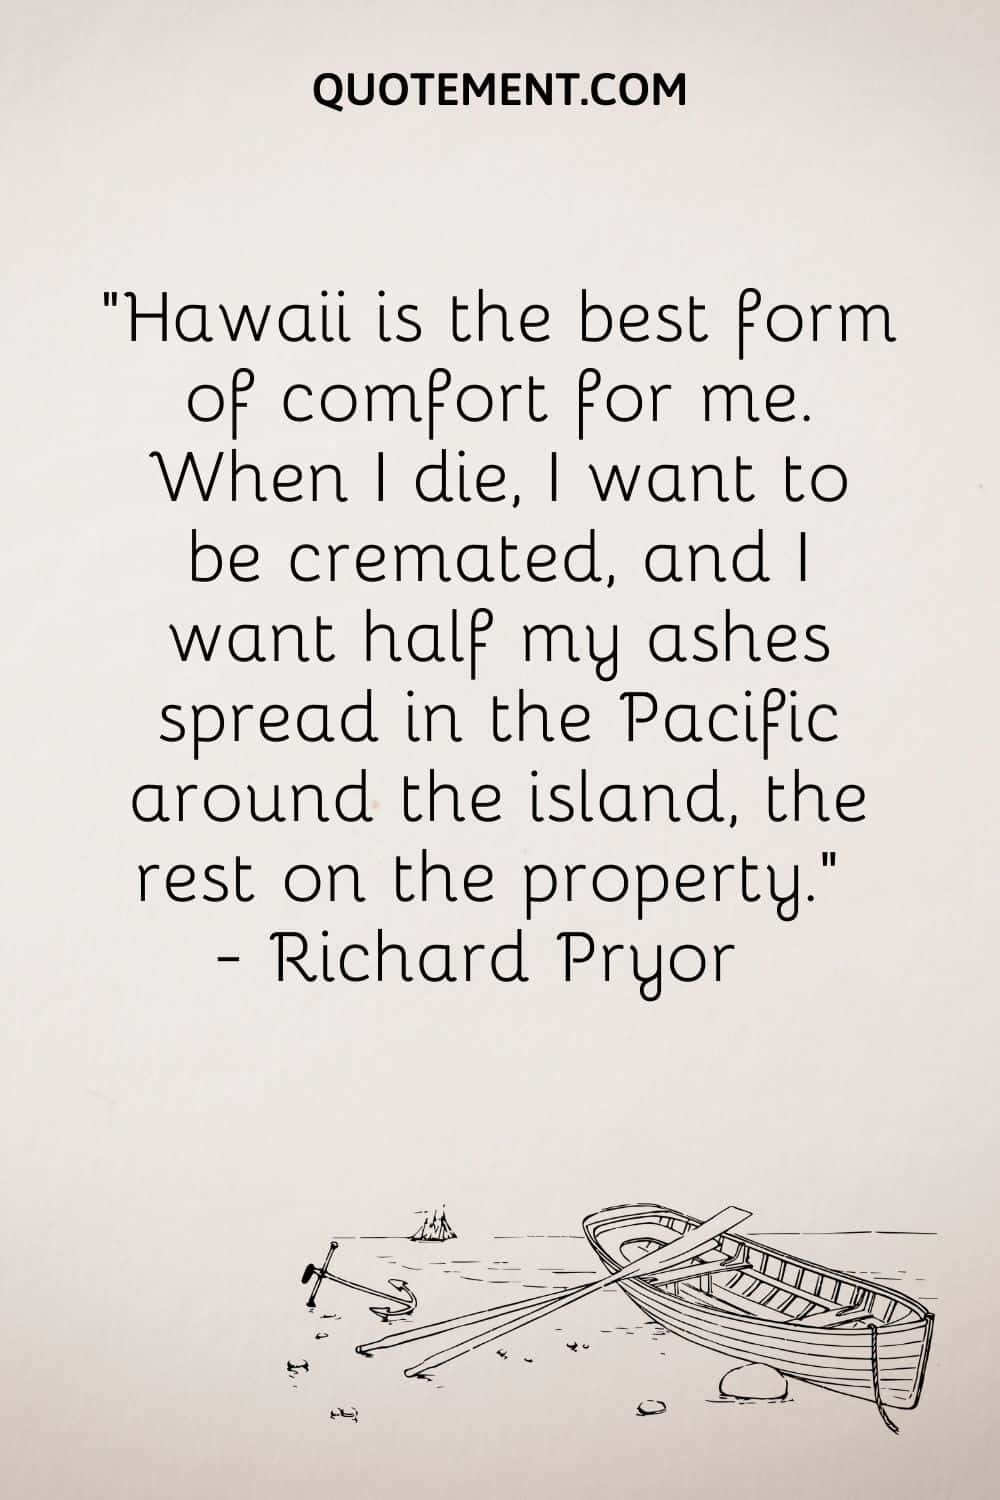 “Hawaii is the best form of comfort for me. When I die, I want to be cremated, and I want half my ashes spread in the Pacific around the island, the rest on the property.” — Richard Pryor